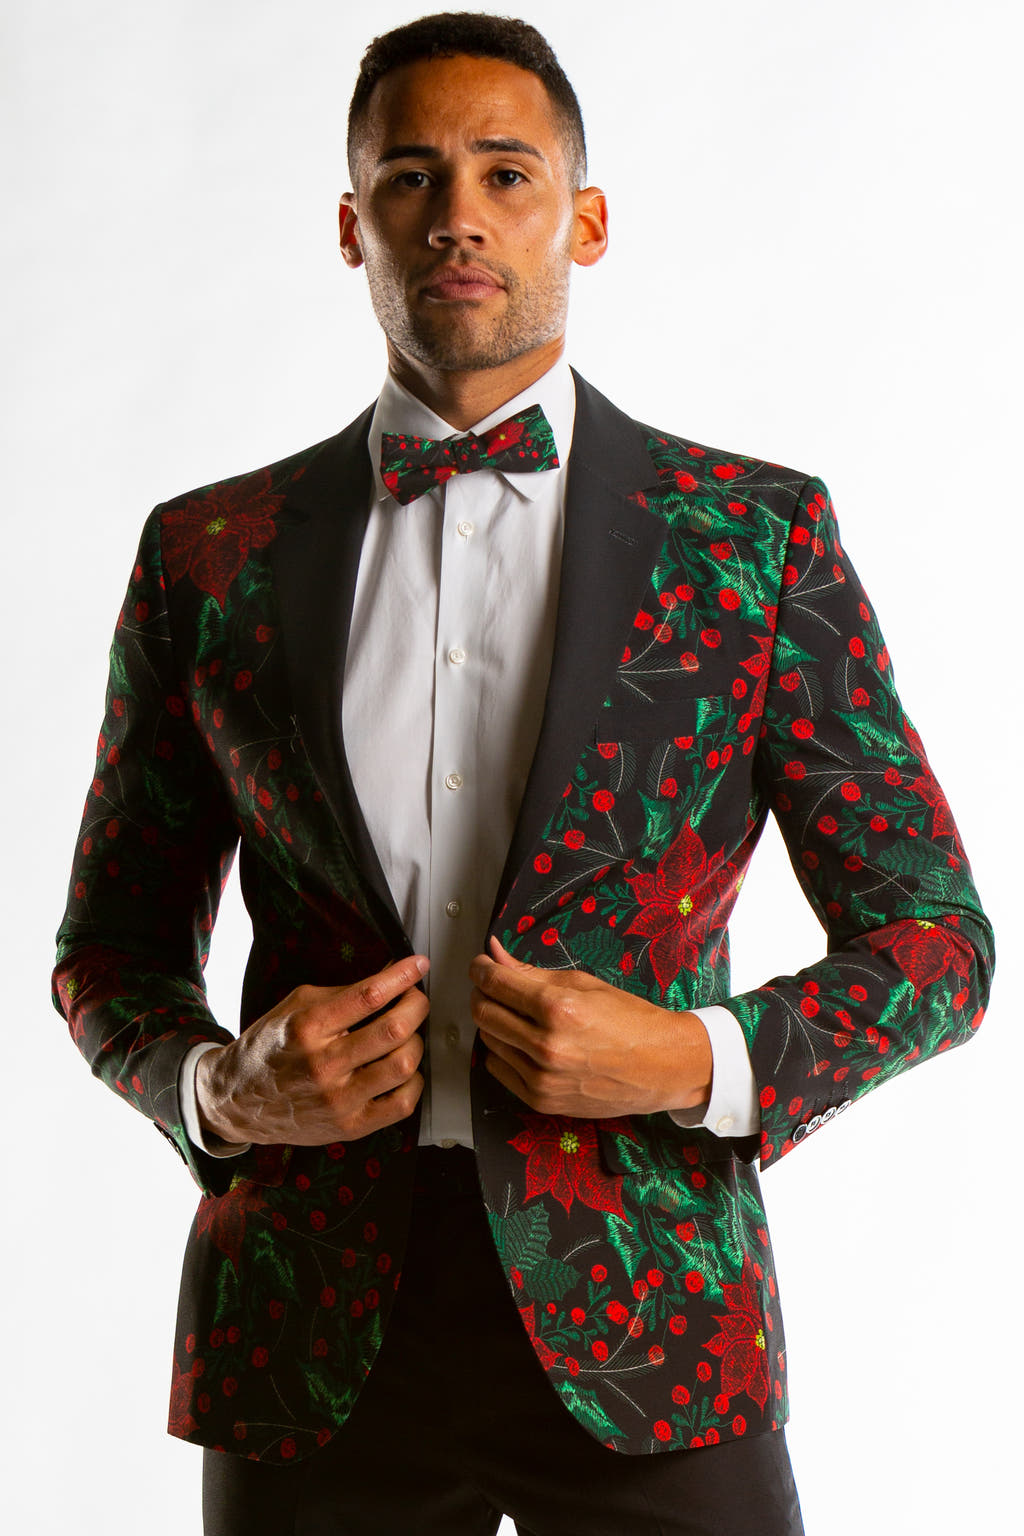 The Centerpiece | Poinsettia Ugly Christmas Suit 